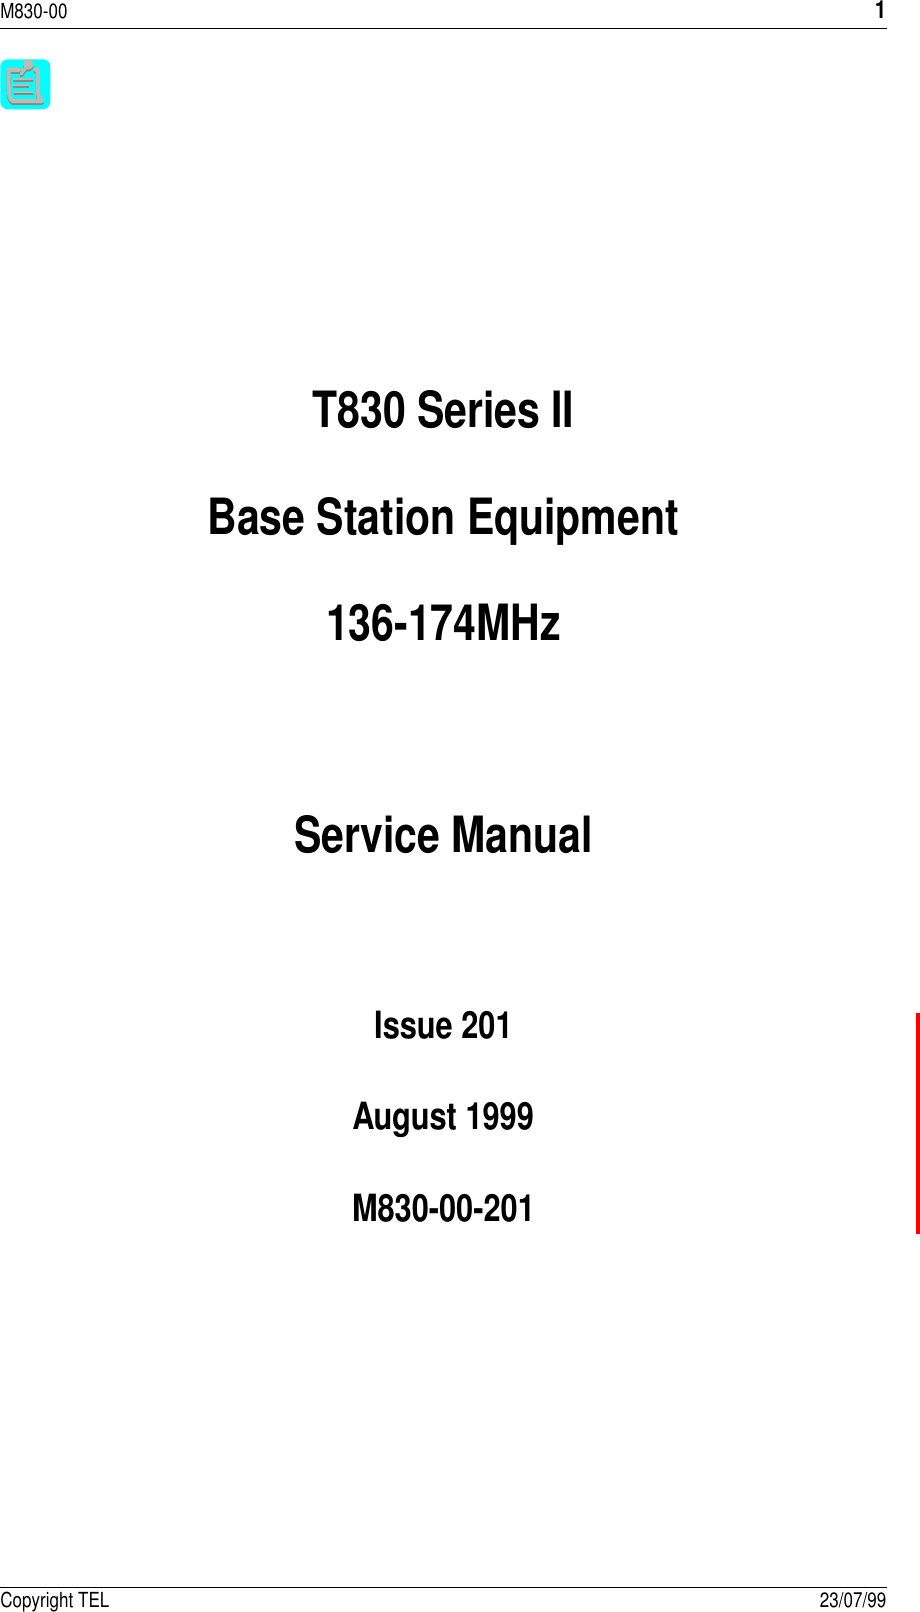 M830-001Copyright TEL 23/07/99T830 Series IIBase Station Equipment136-174MHzService ManualIssue 201August 1999M830-00-201